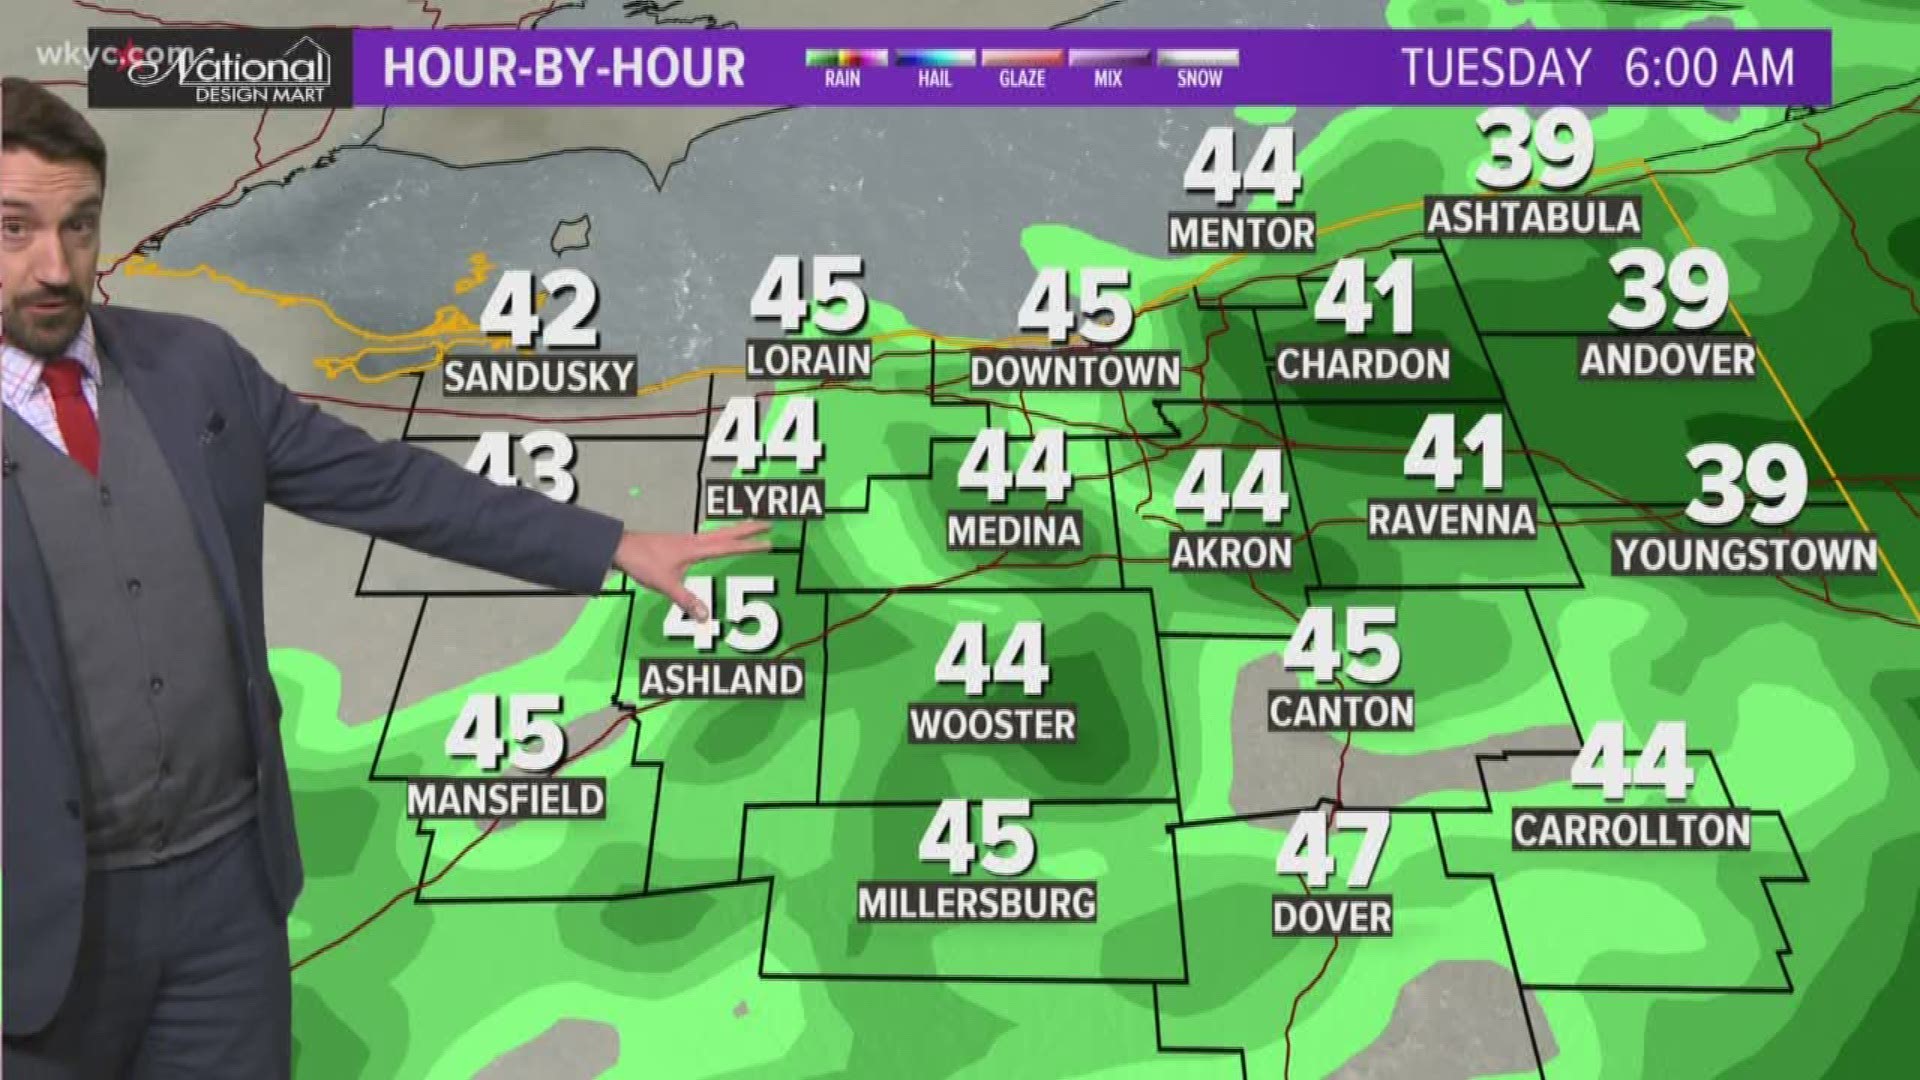 On Tuesday rain will continue on and off through the morning before we begin to dry out later in the day. Temps will actually start on the mild side with mid 40s.